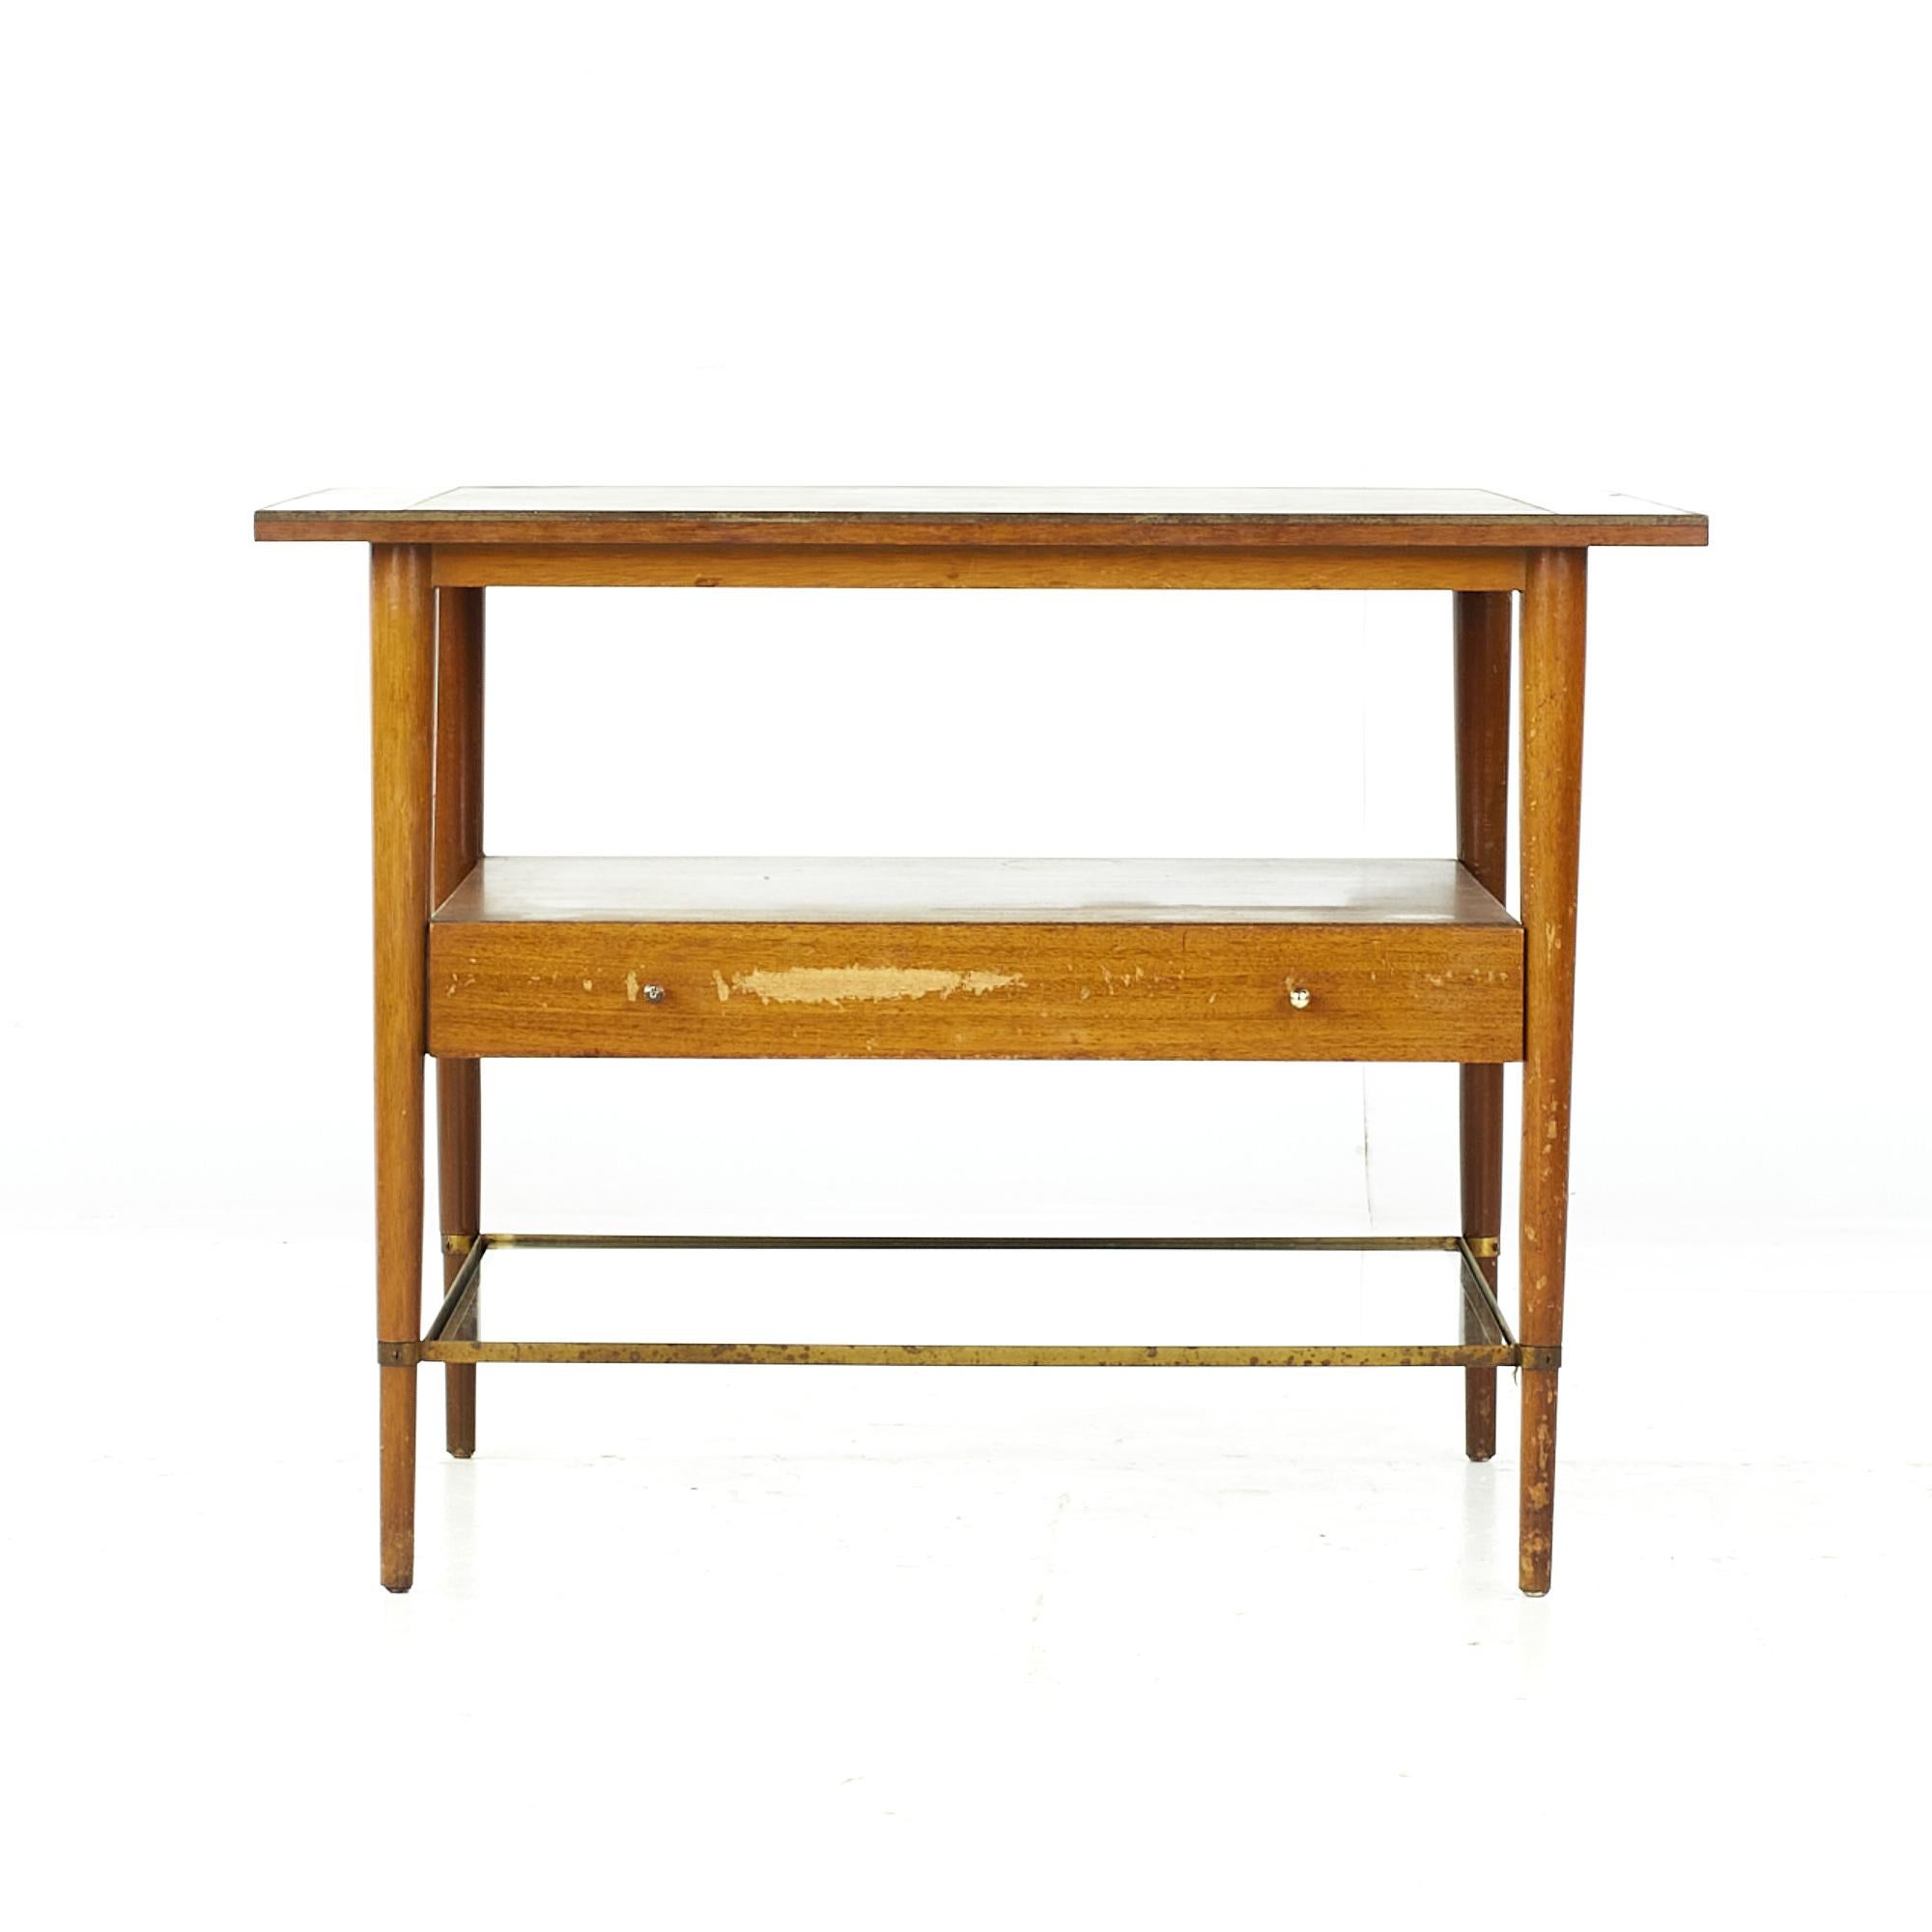 Paul McCobb Connoisseur midcentury side end table.

This side table measures: 32 wide x 26 deep x 24.25 inches high.

All pieces of furniture can be had in what we call restored vintage condition. That means the piece is restored upon purchase